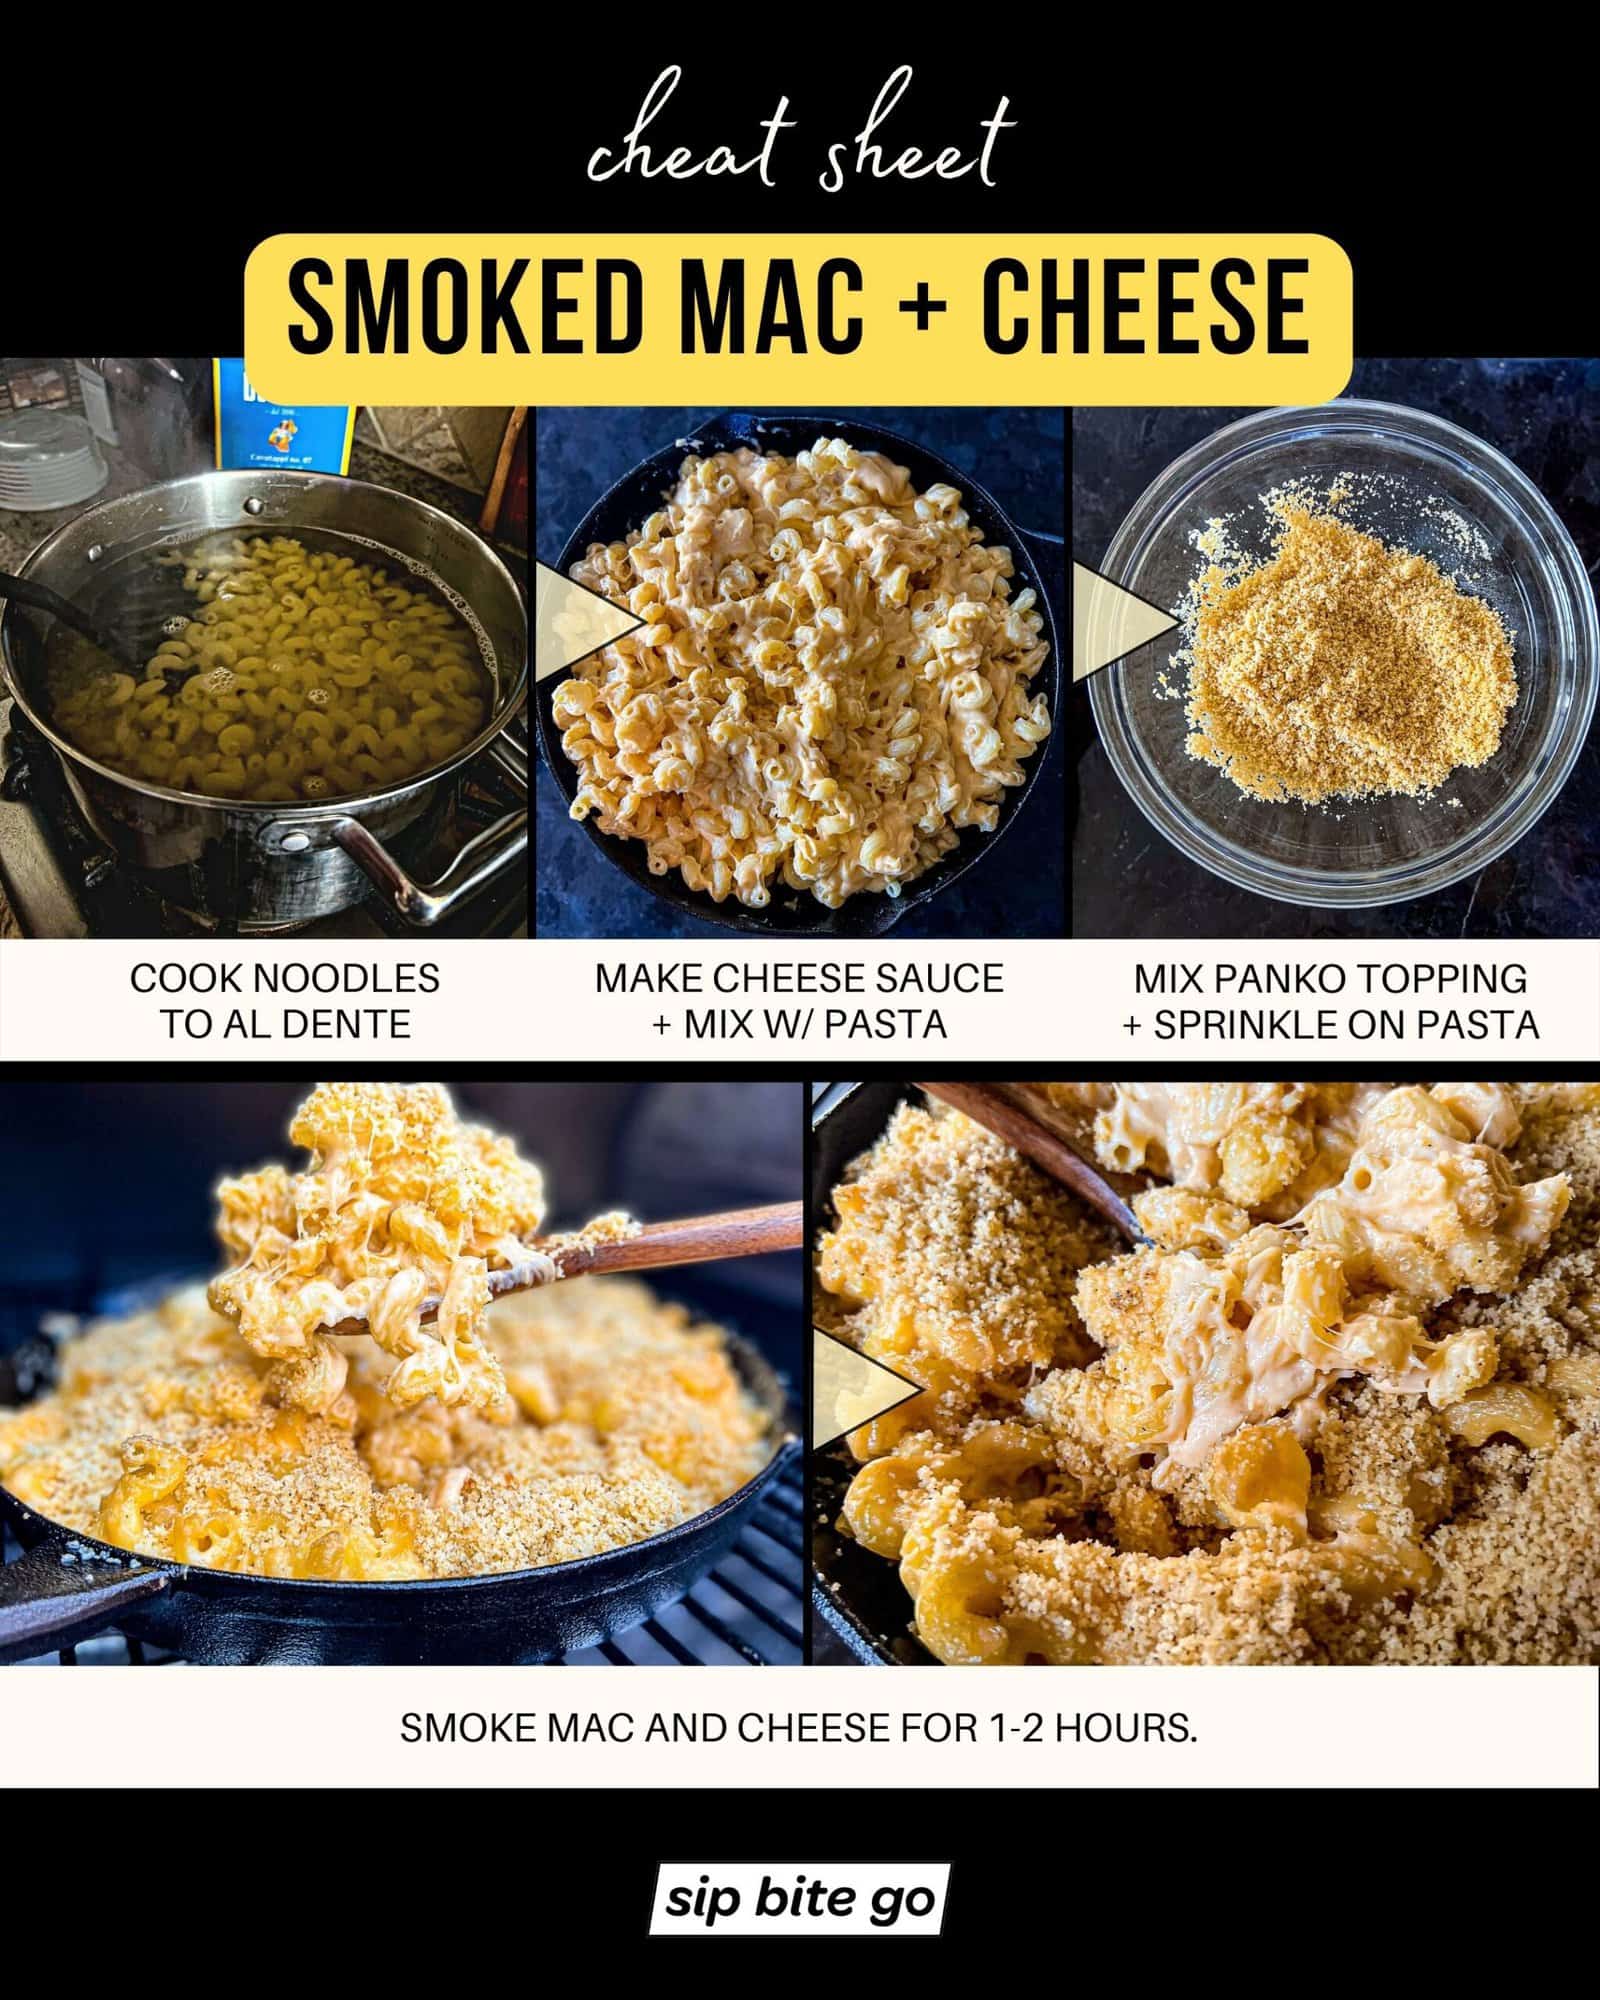 Infographic with recipe steps and captions for smoking mac and cheese on pellet grill